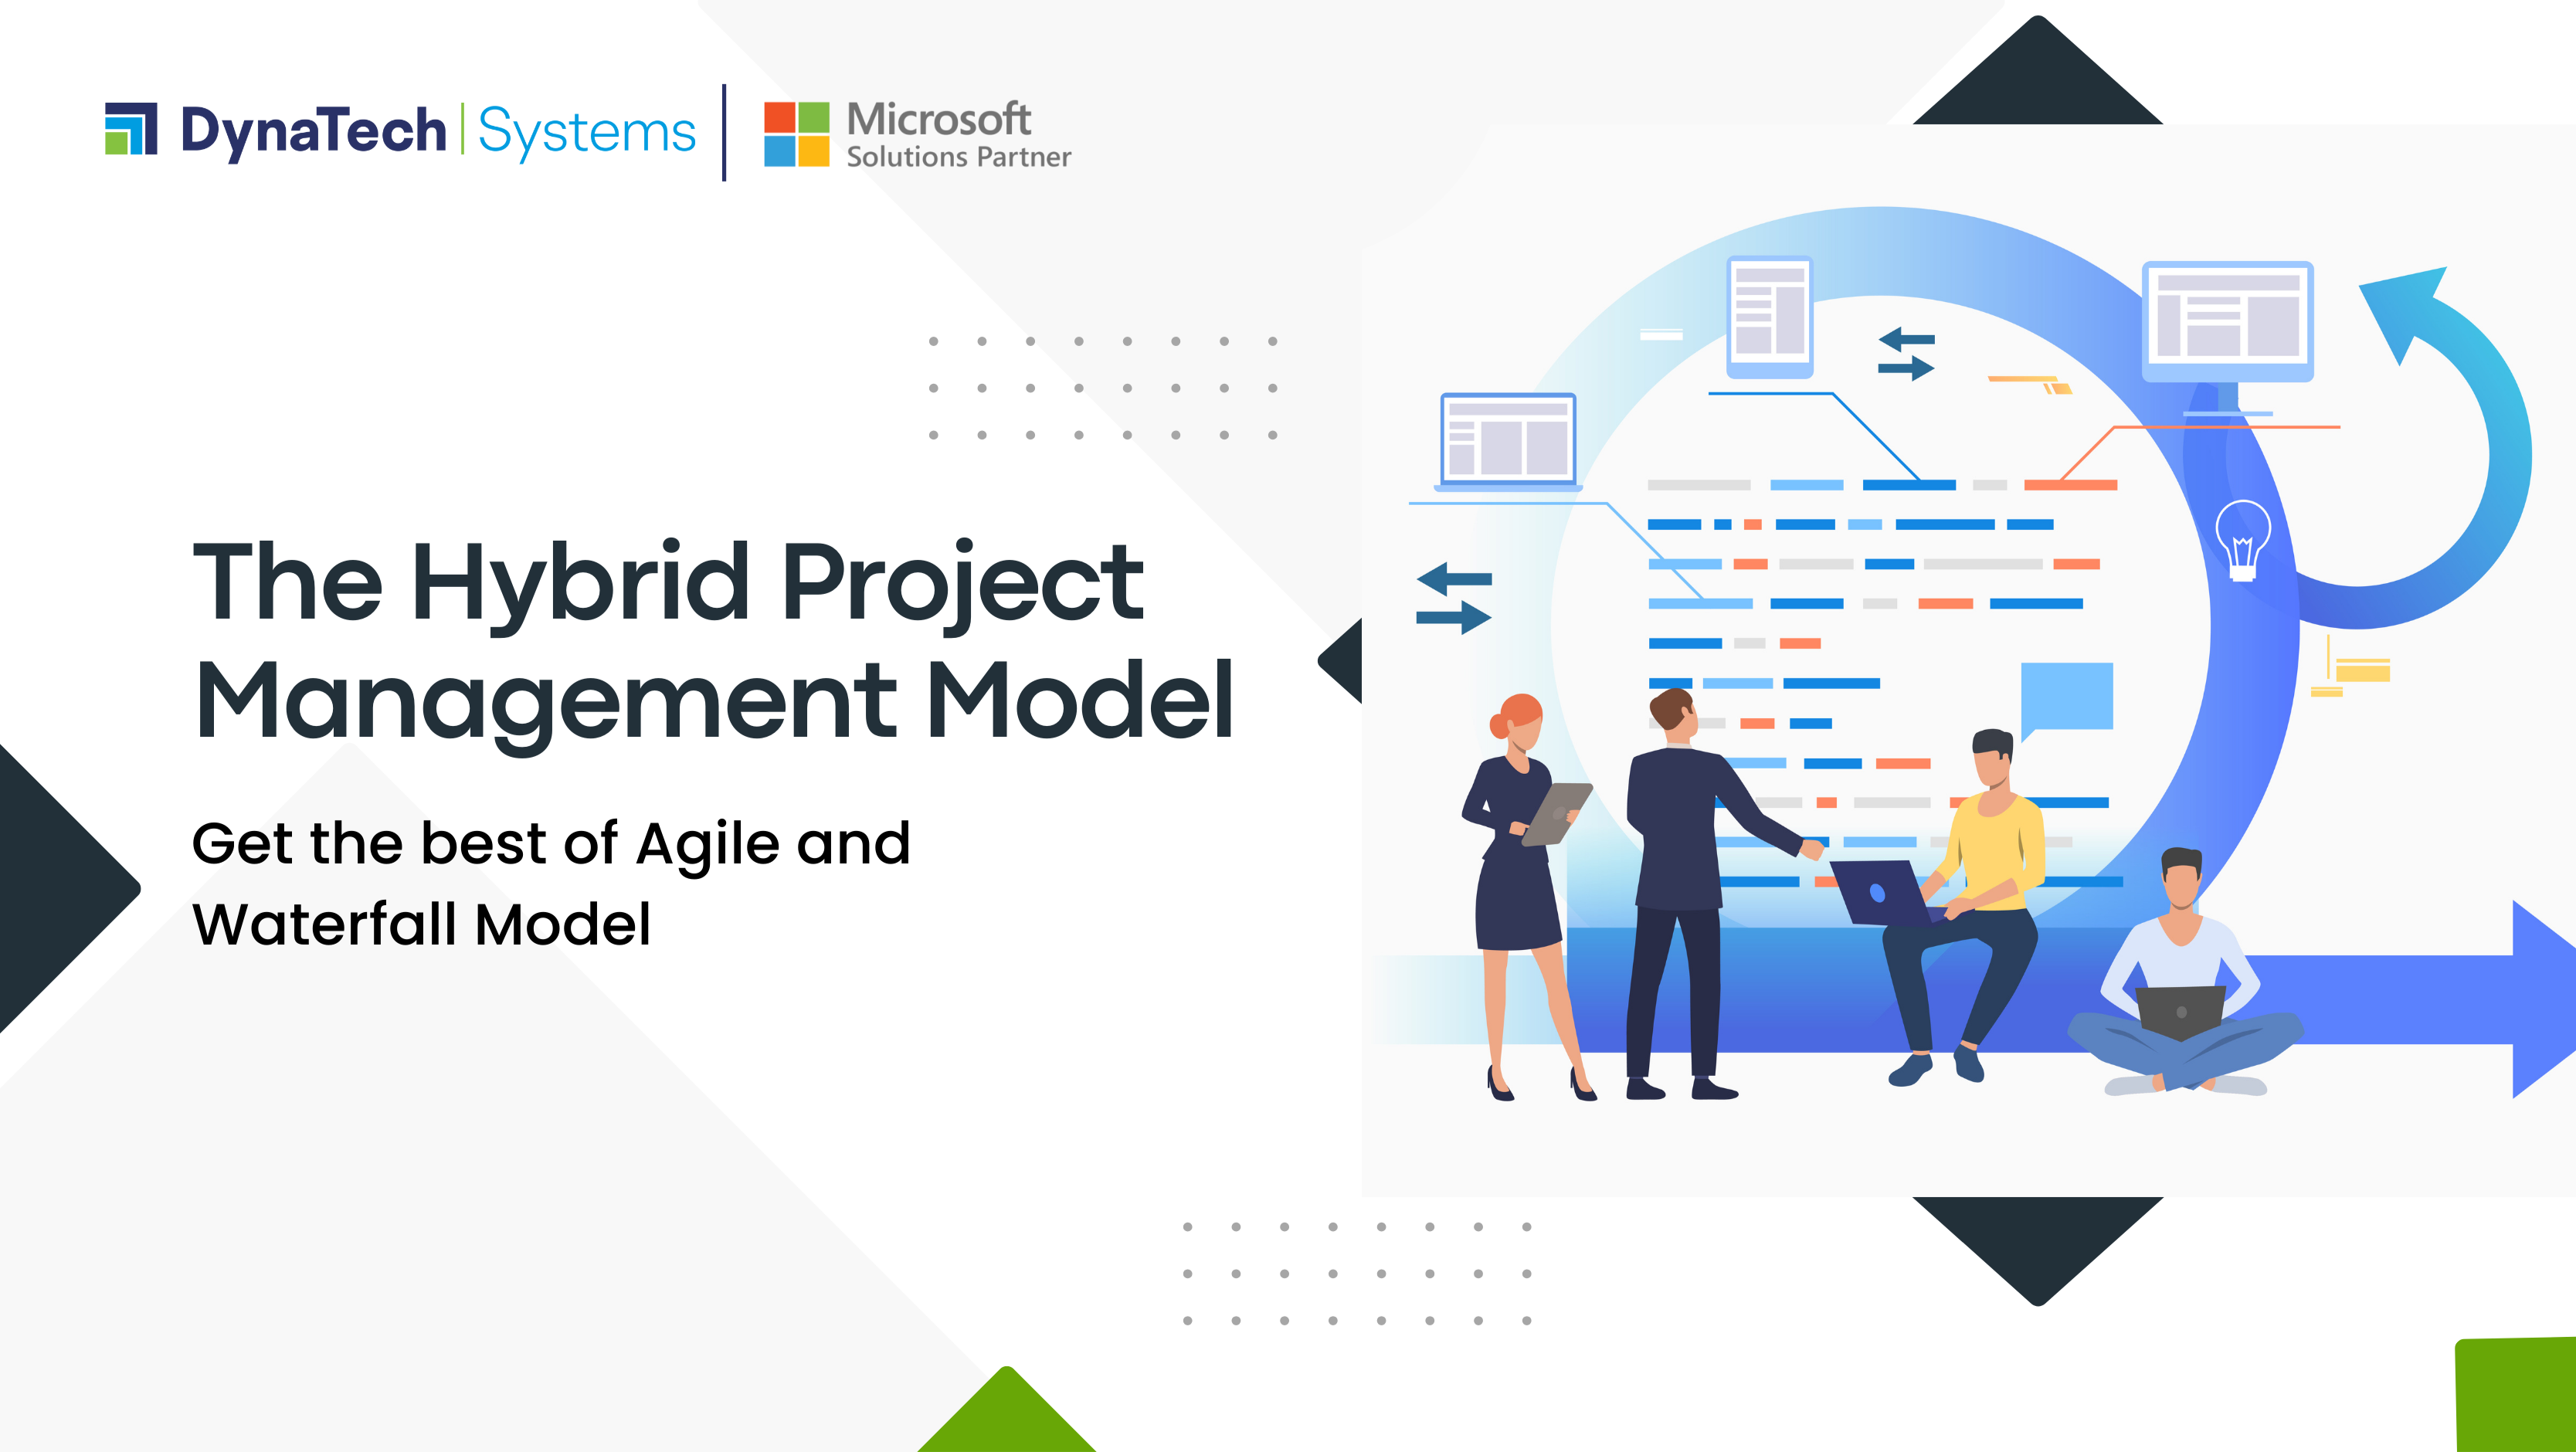 The Hybrid Project Management Model – Getting the Best of Agile and Waterfall